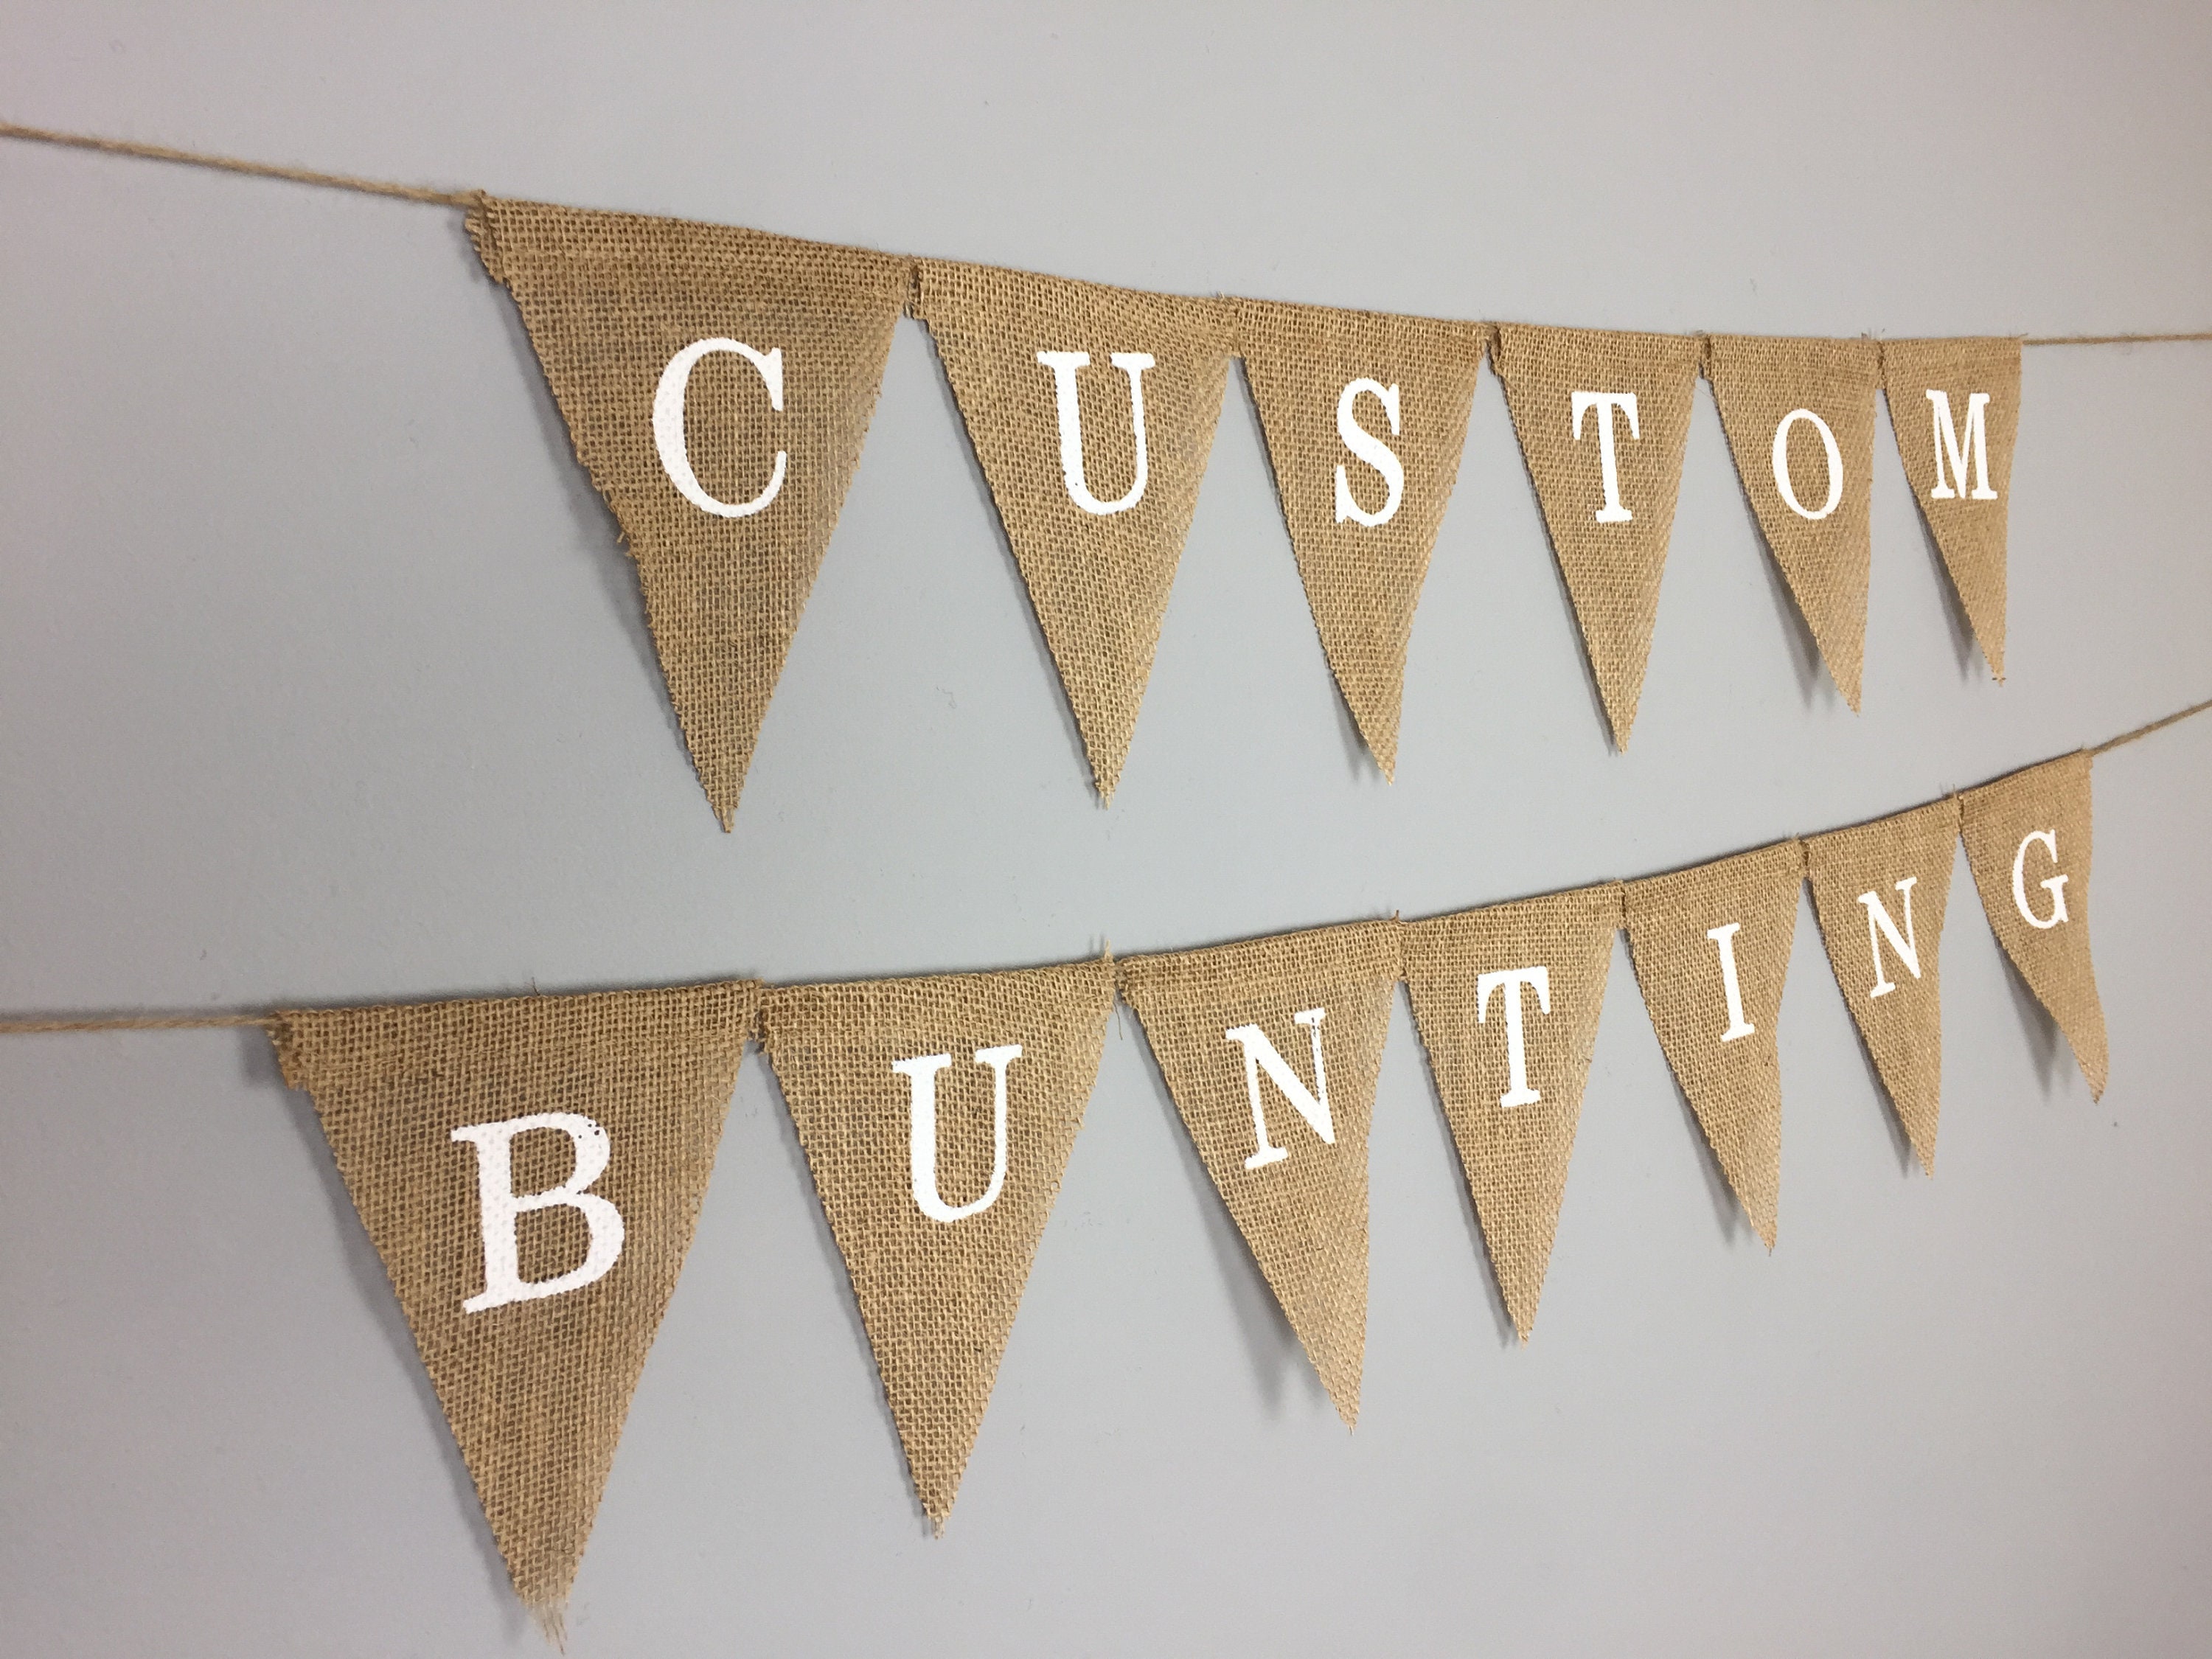 Newin Star Bunting Banners Love Heart Linen Bunting Hessian 8 Flags Banner Jute Fabric Triangle Pennant Garlands Vintage Cloth Shabby Decoration 1.8m/5.9ft 